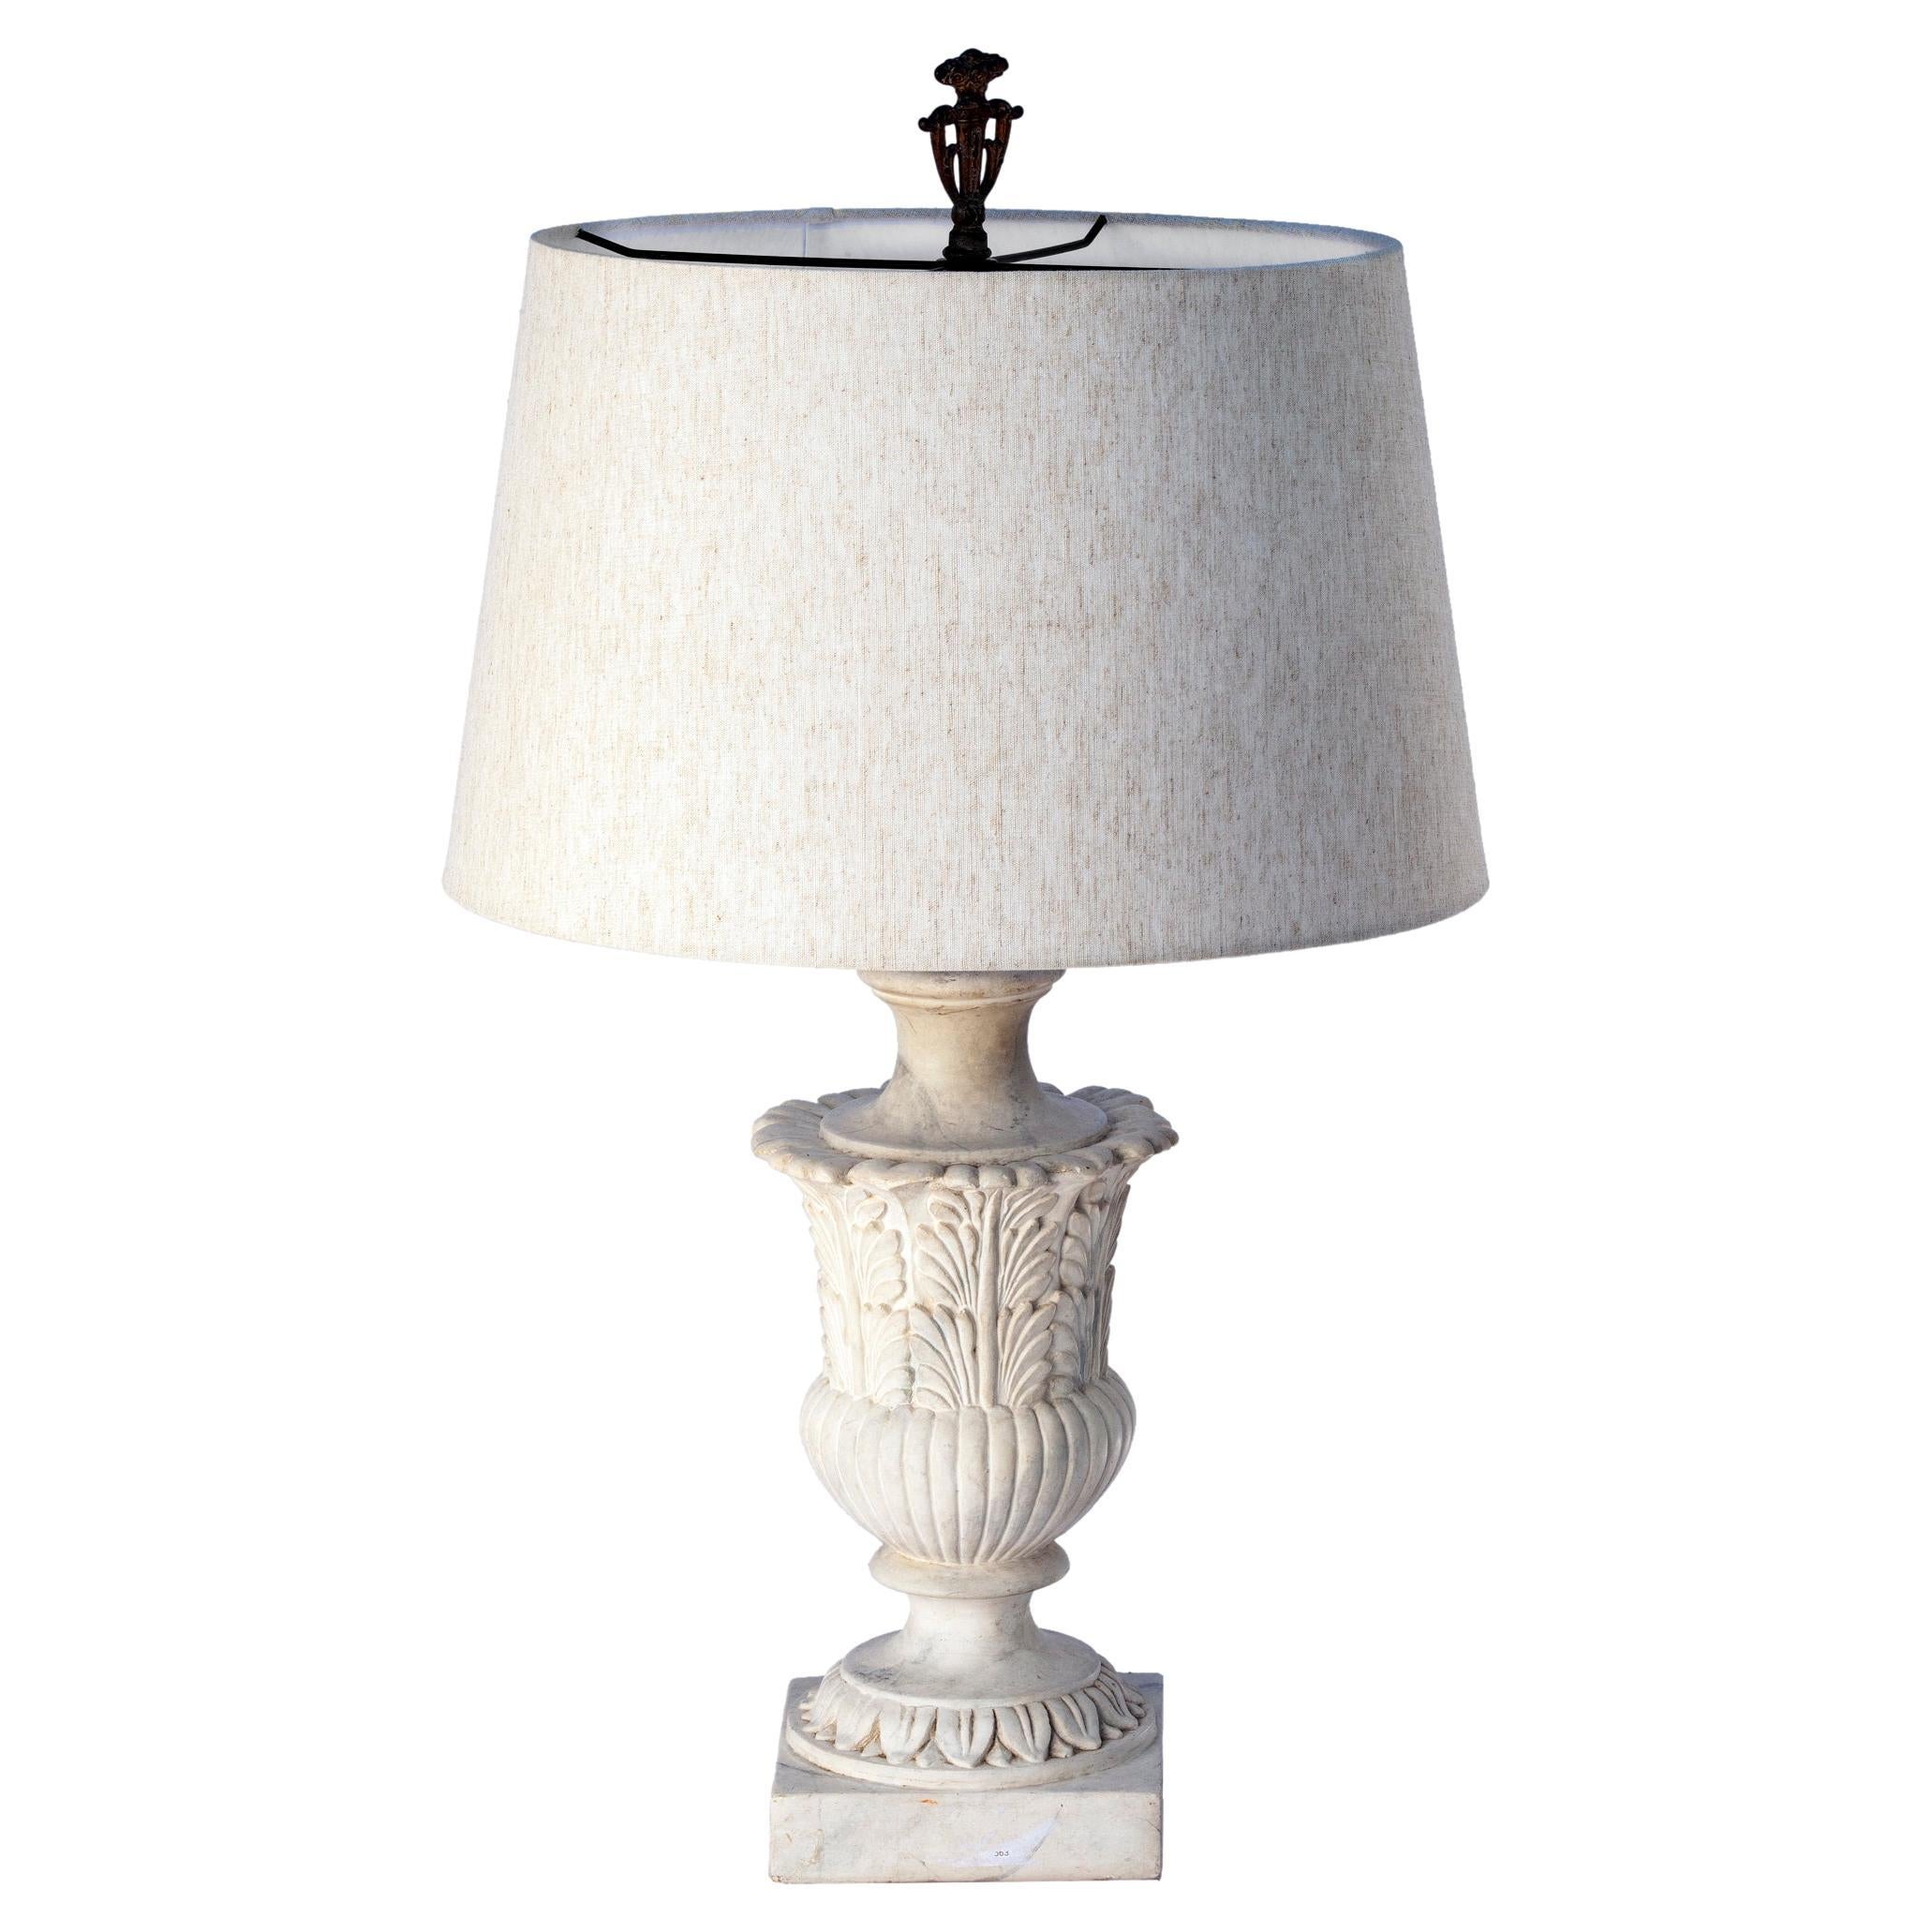 Faux White Marble Lamp White Linen Shade For Sale